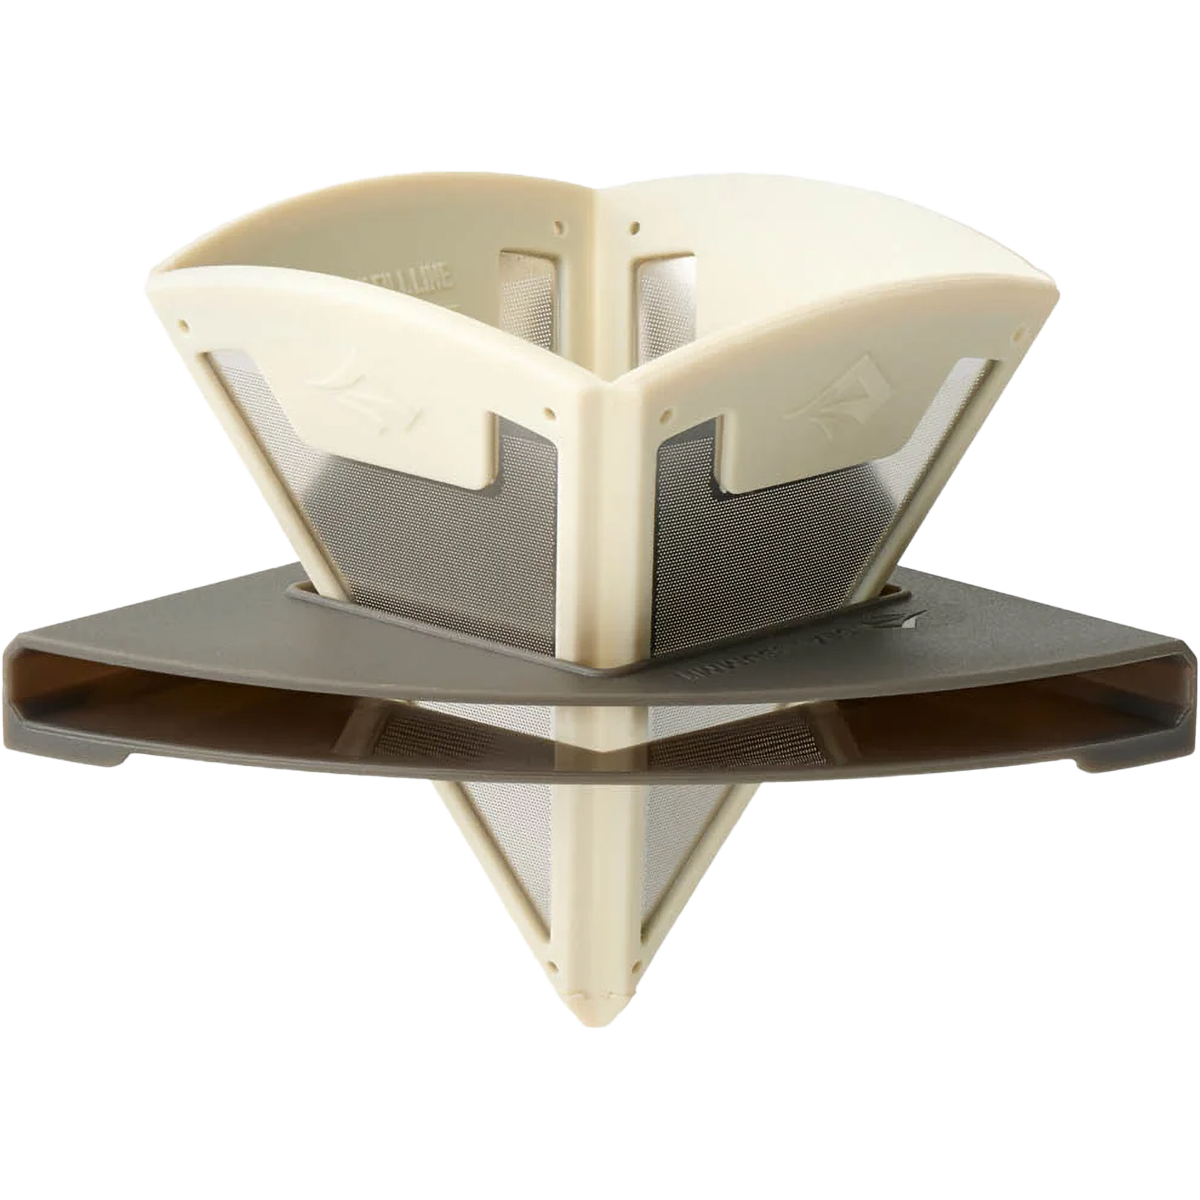 Frontier Ultralight Collapsible Pour Over alternate view